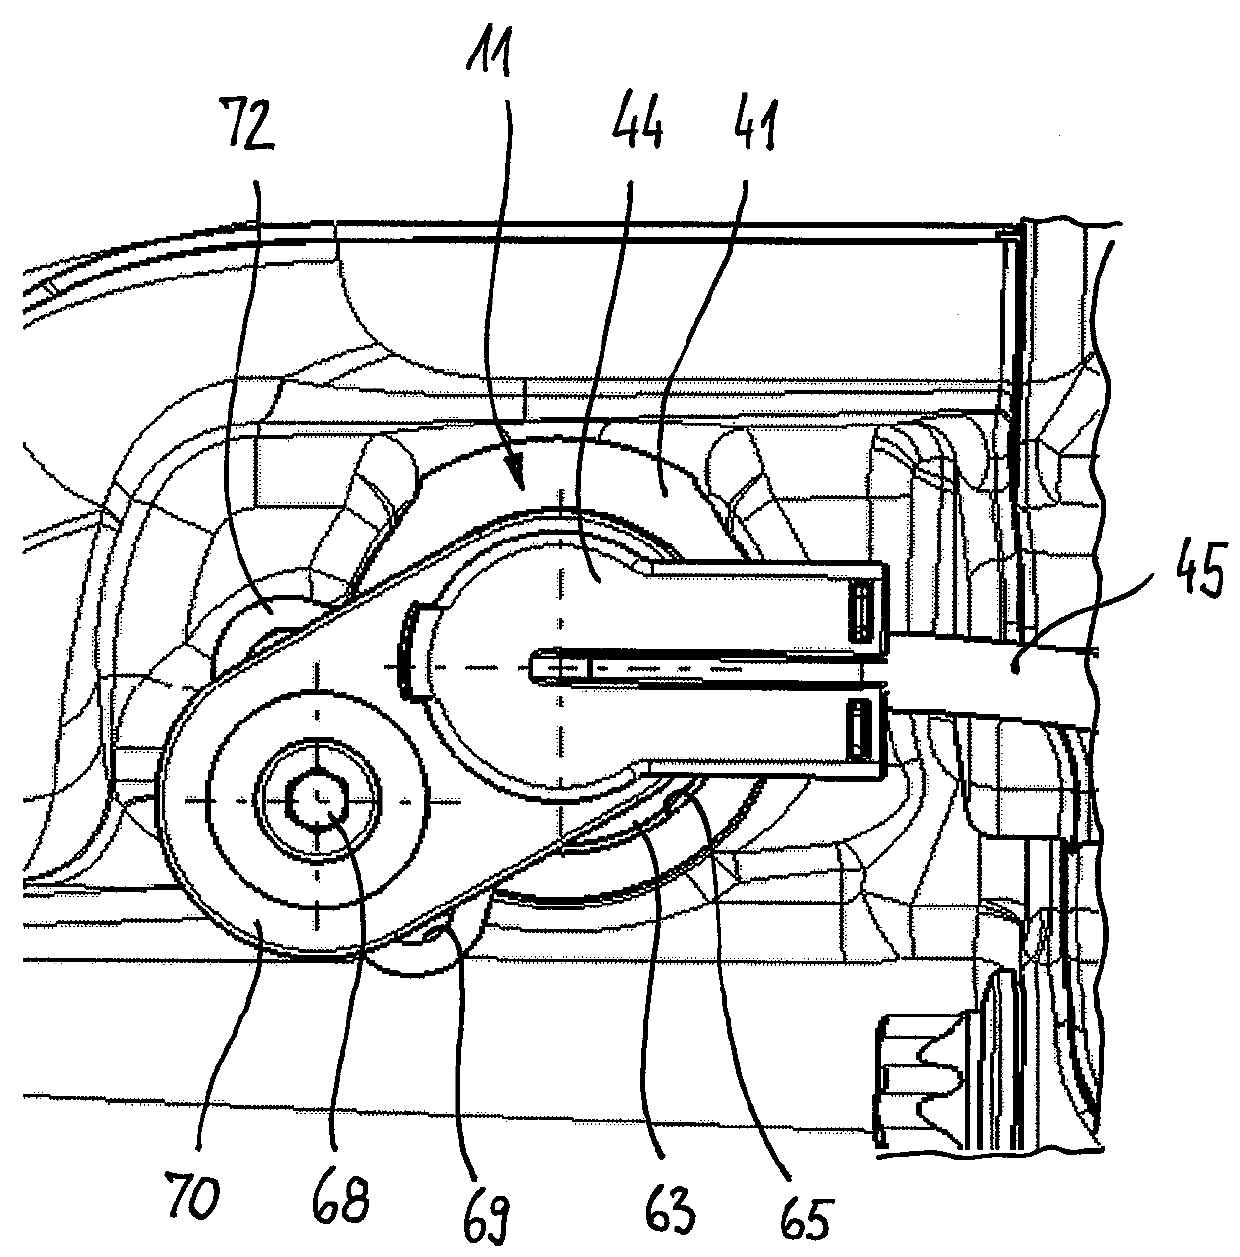 Clutch assembly with sensor unit and drive assembly with such clutch assembly